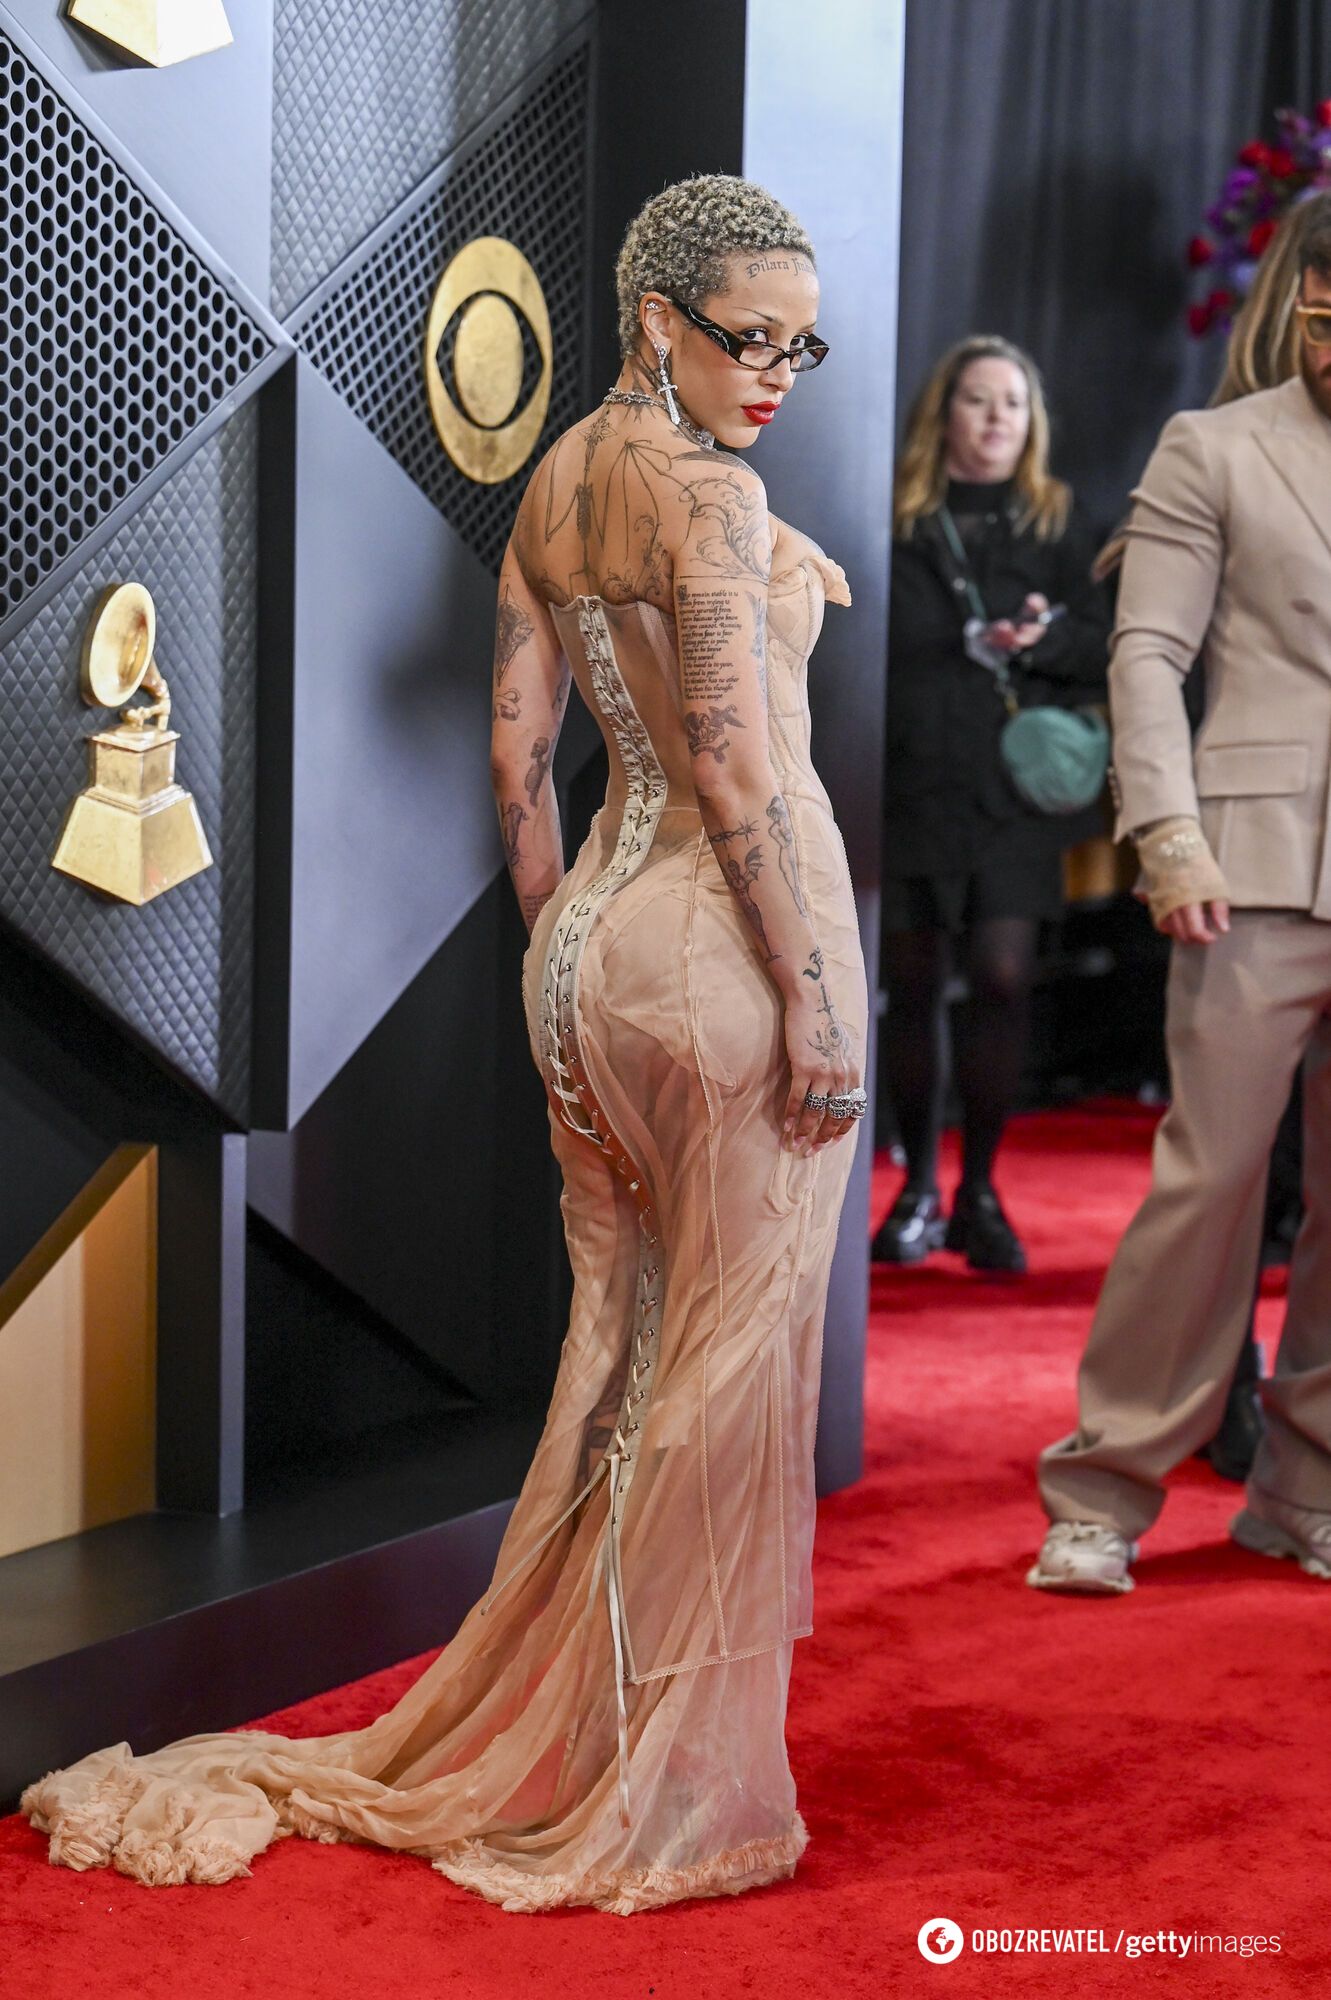 A 1995 Versace dress, a ''bride contest'' and daring frankness. Top 10 most striking looks of the Grammy Awards 2024